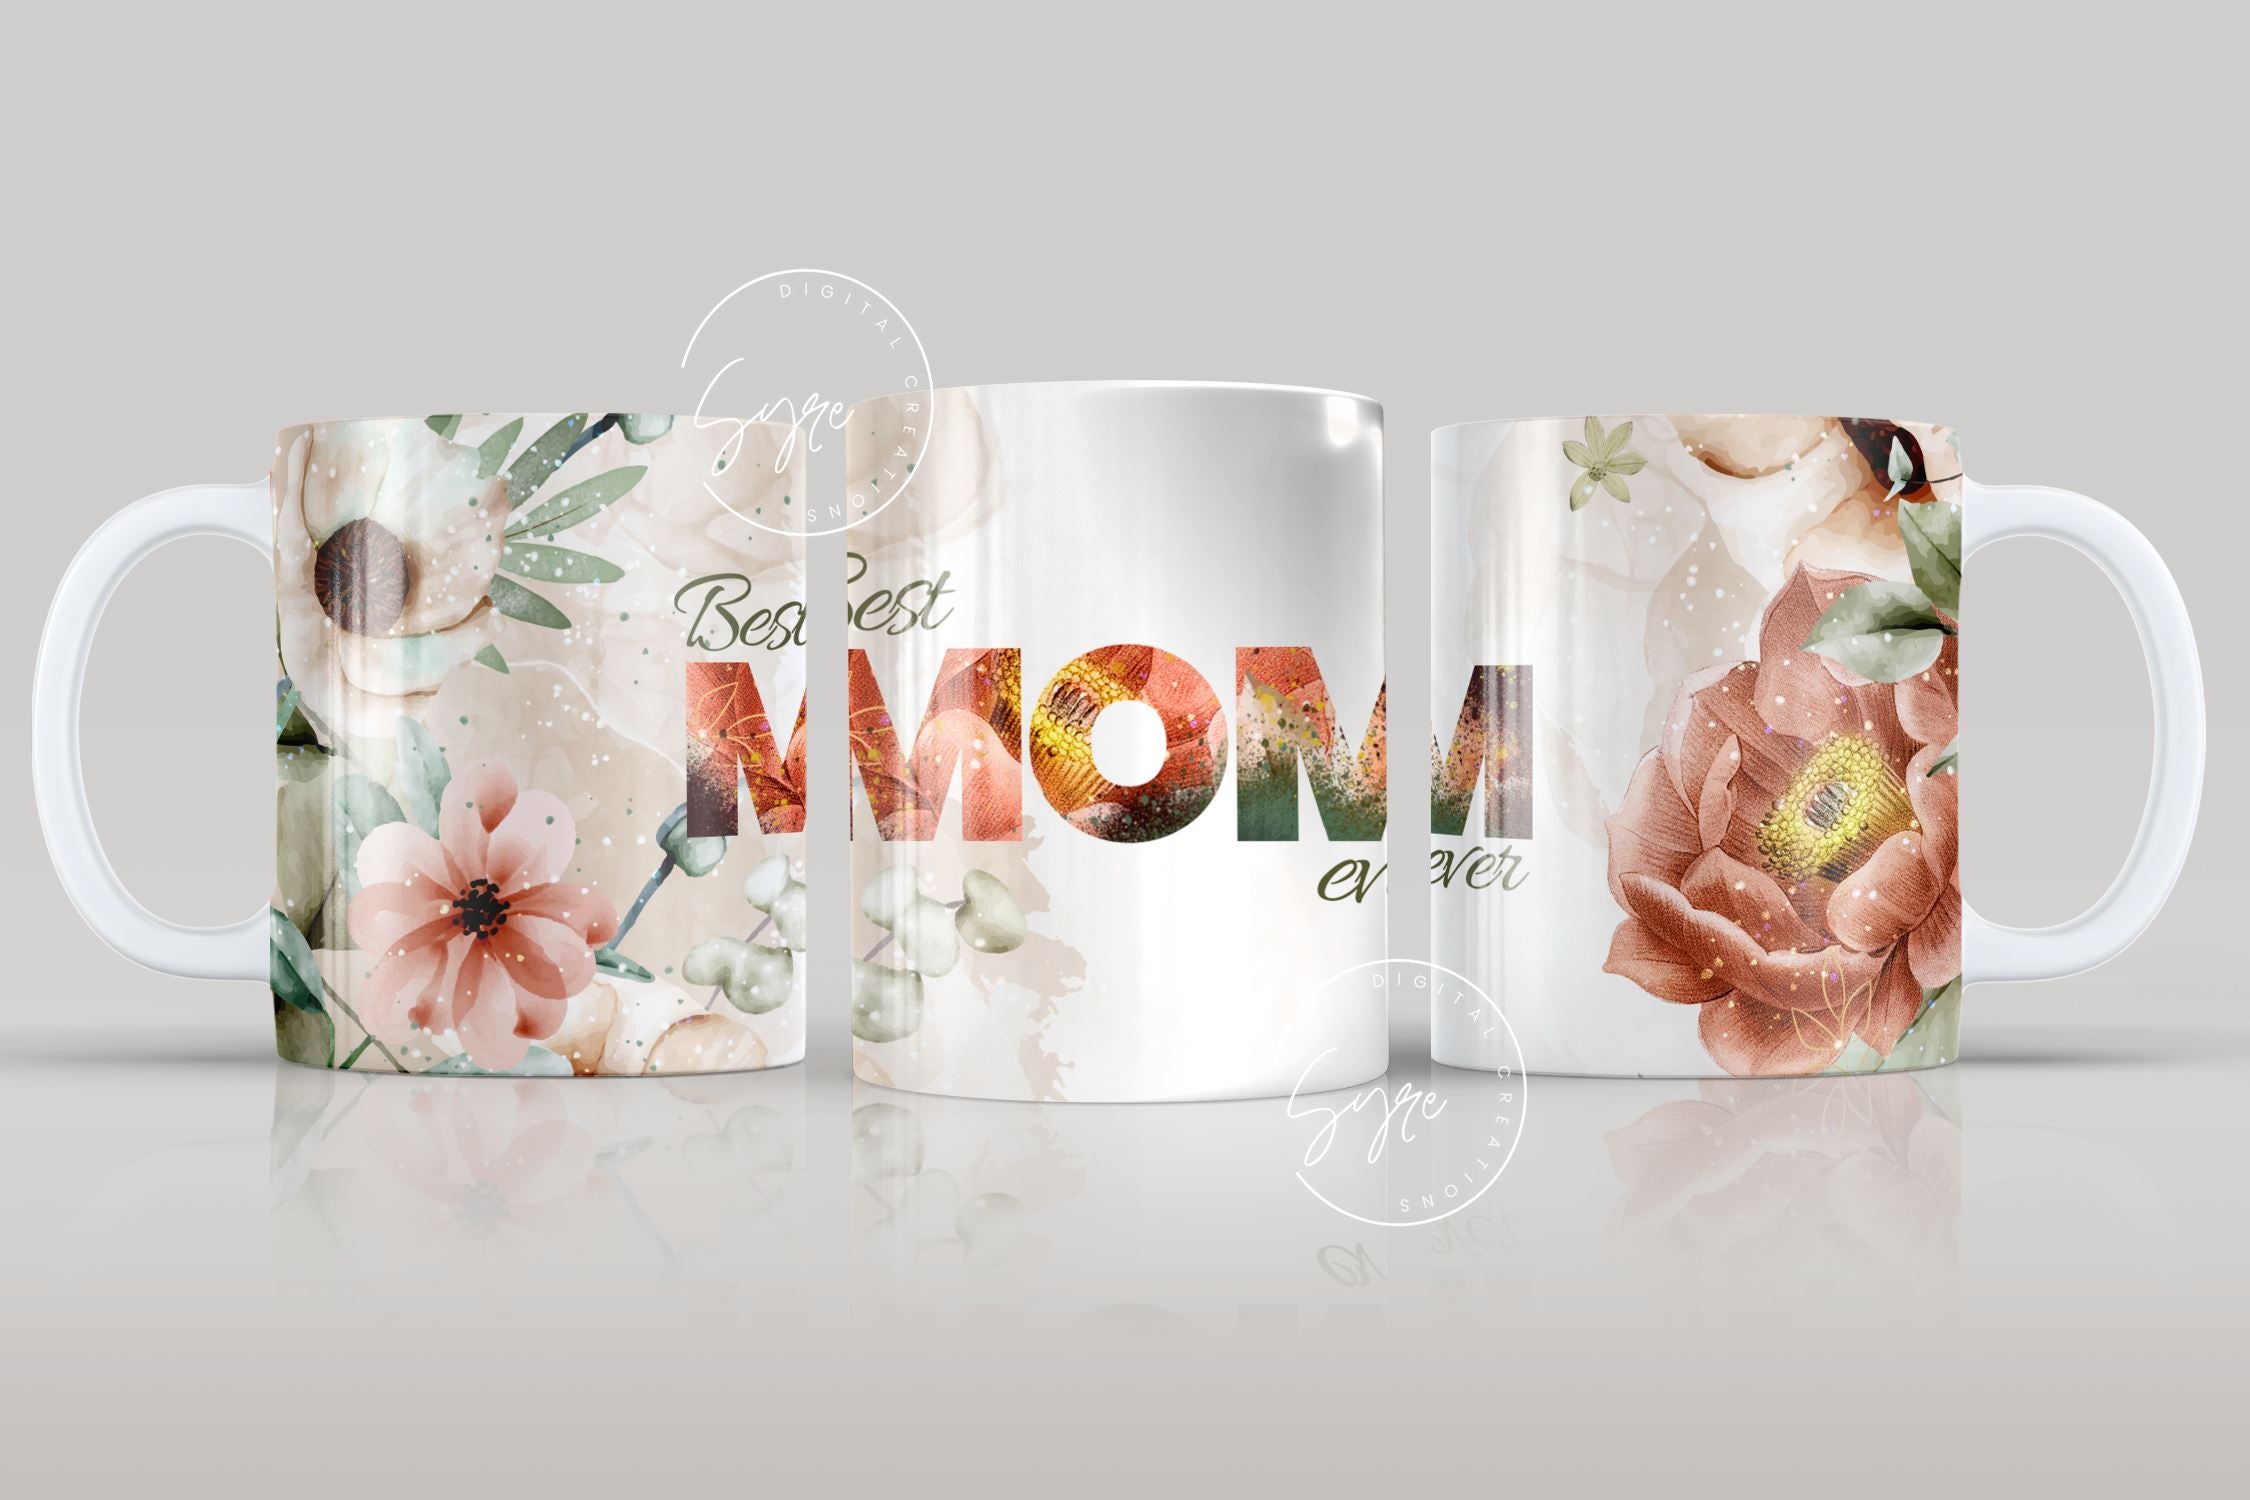 Personalized Gifts with the Cricut Mug Press - Momma Wanderlust